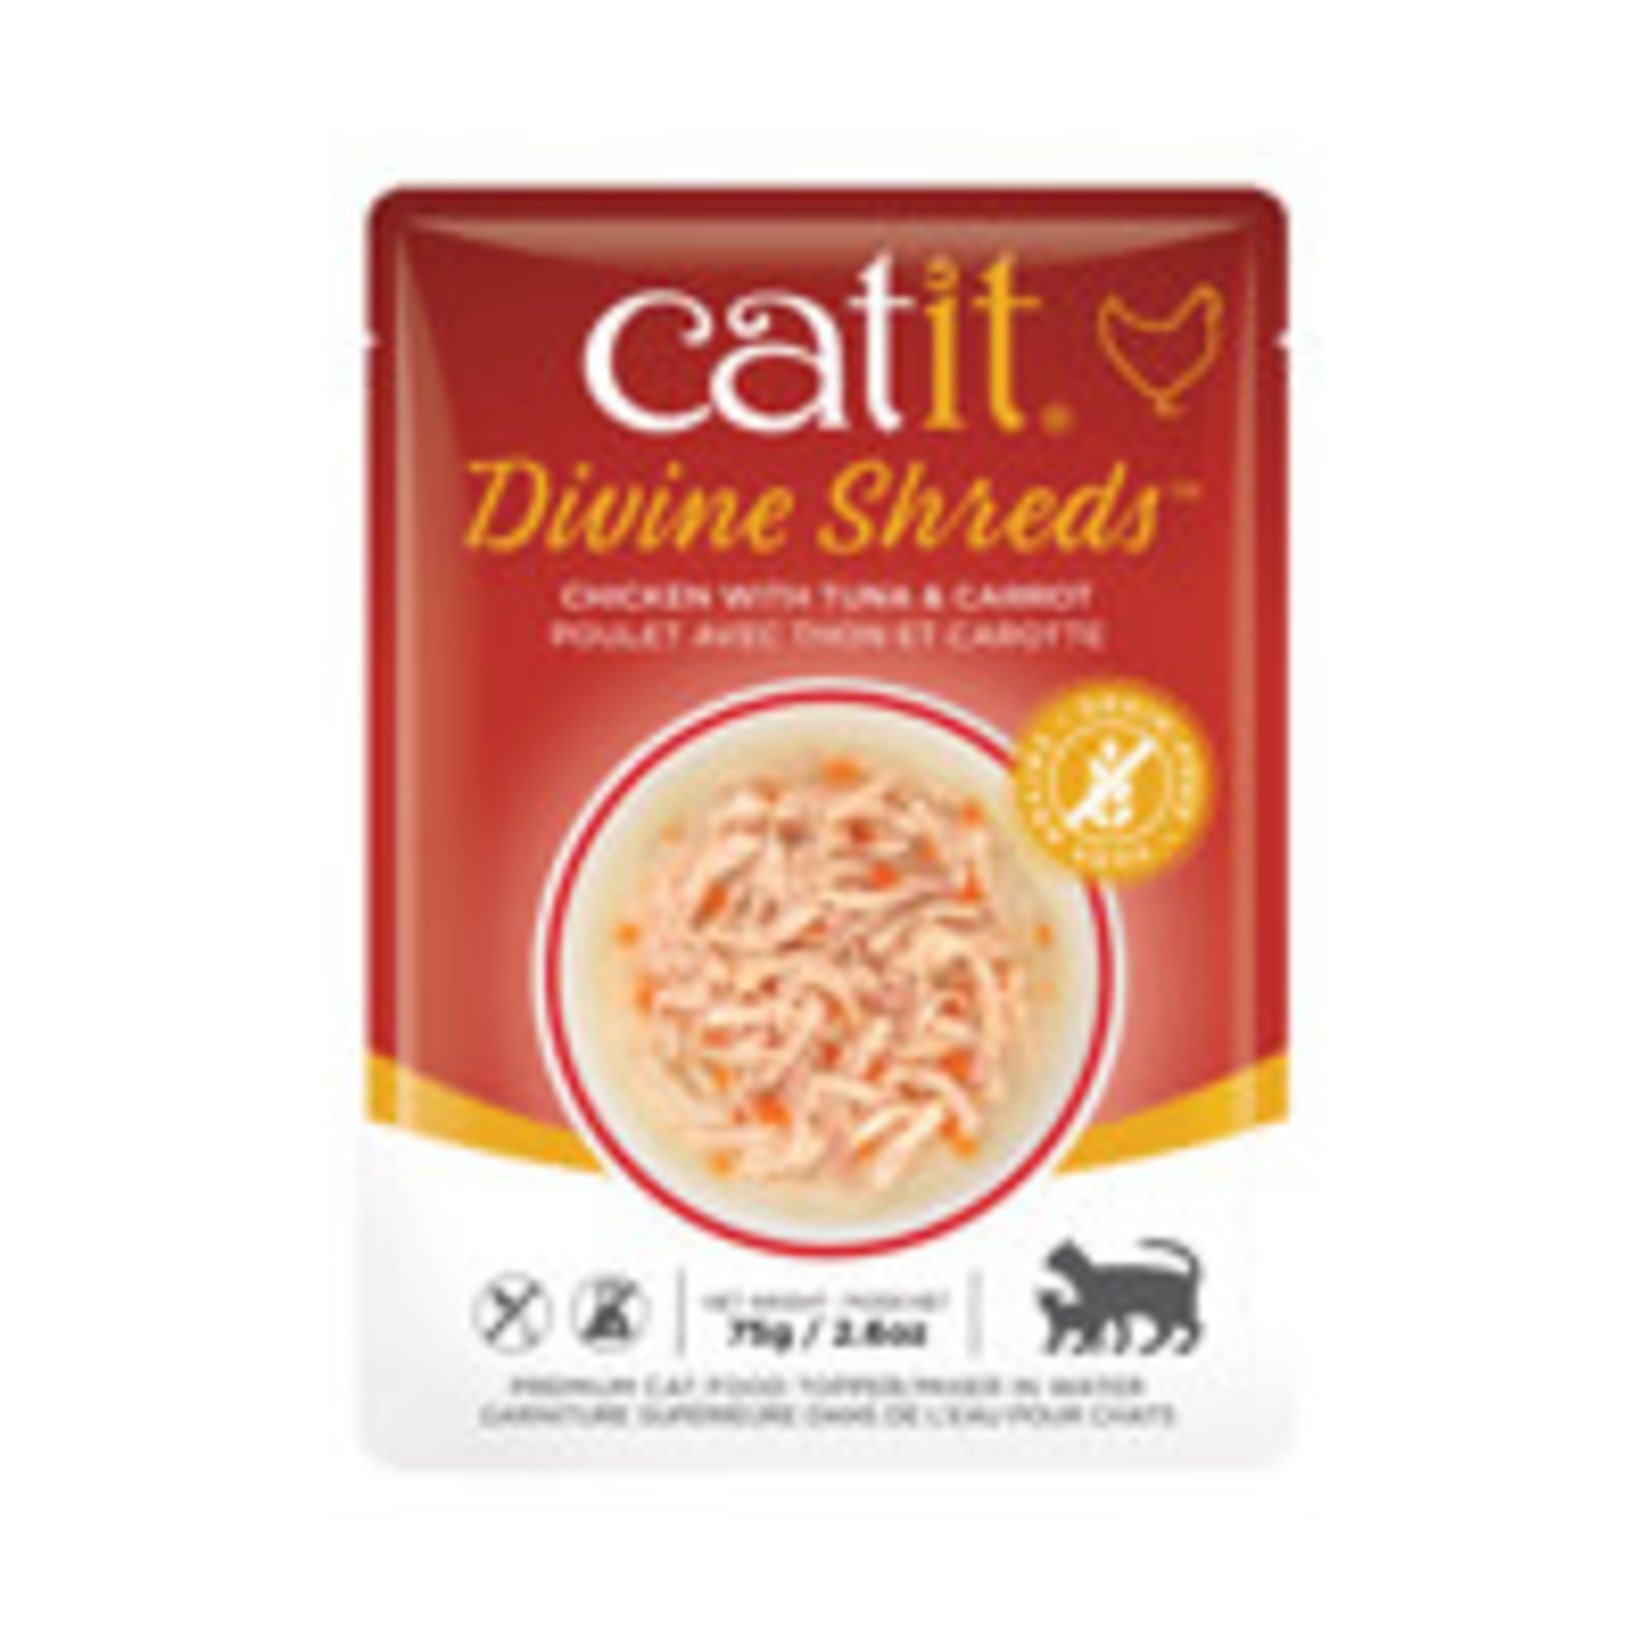 CATIT Catit Divine Shreds - Chicken with Tuna & Carrot - 75g Pouch